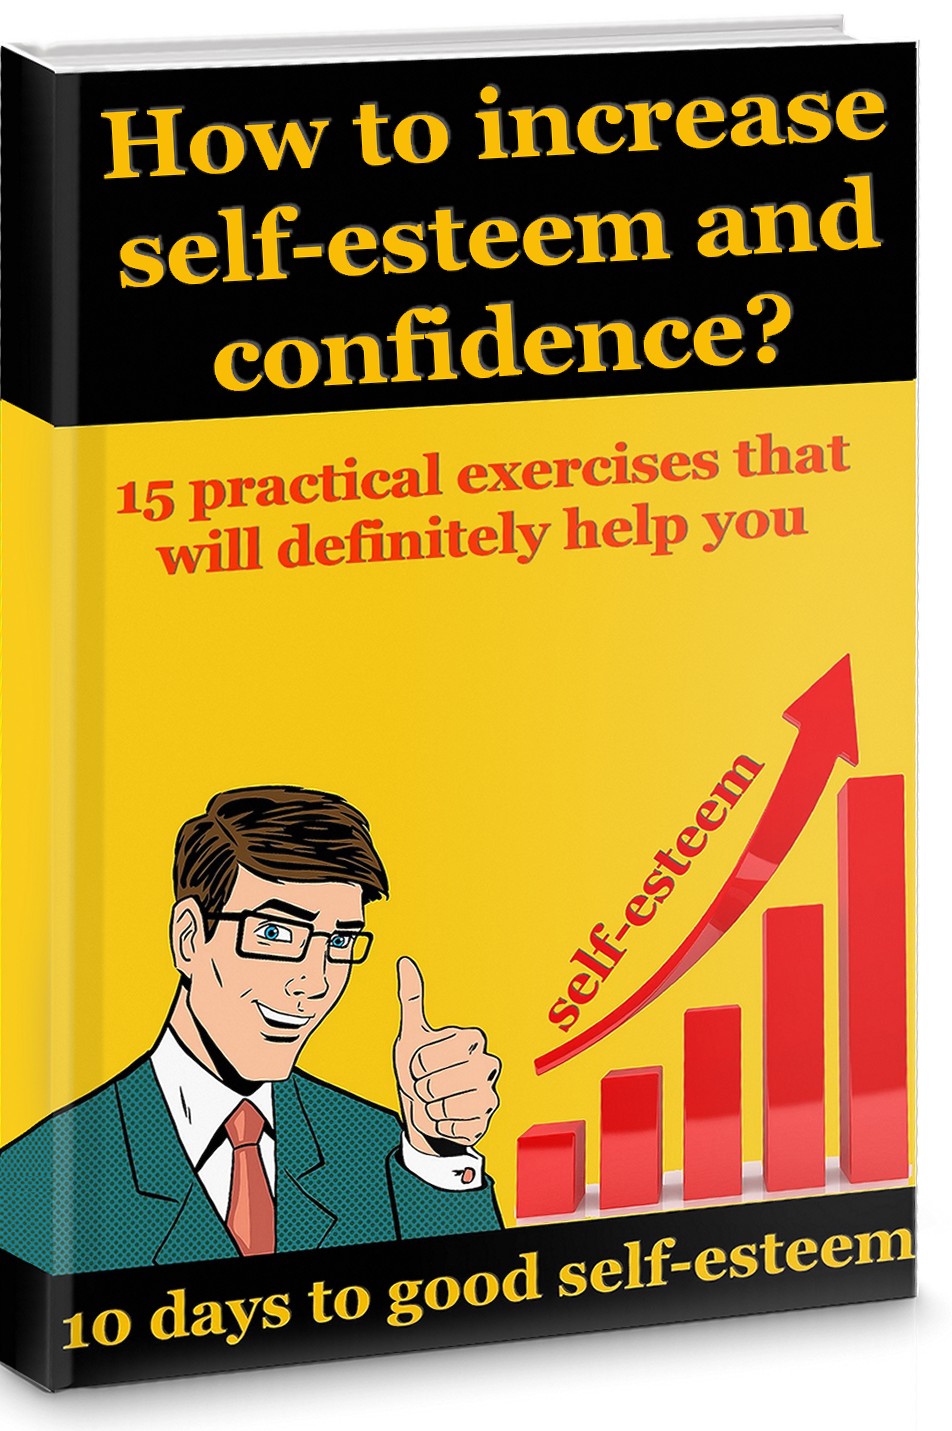 FREE: How to increase self-esteem and confidence? 10 days to good self-esteem by Henry Collins